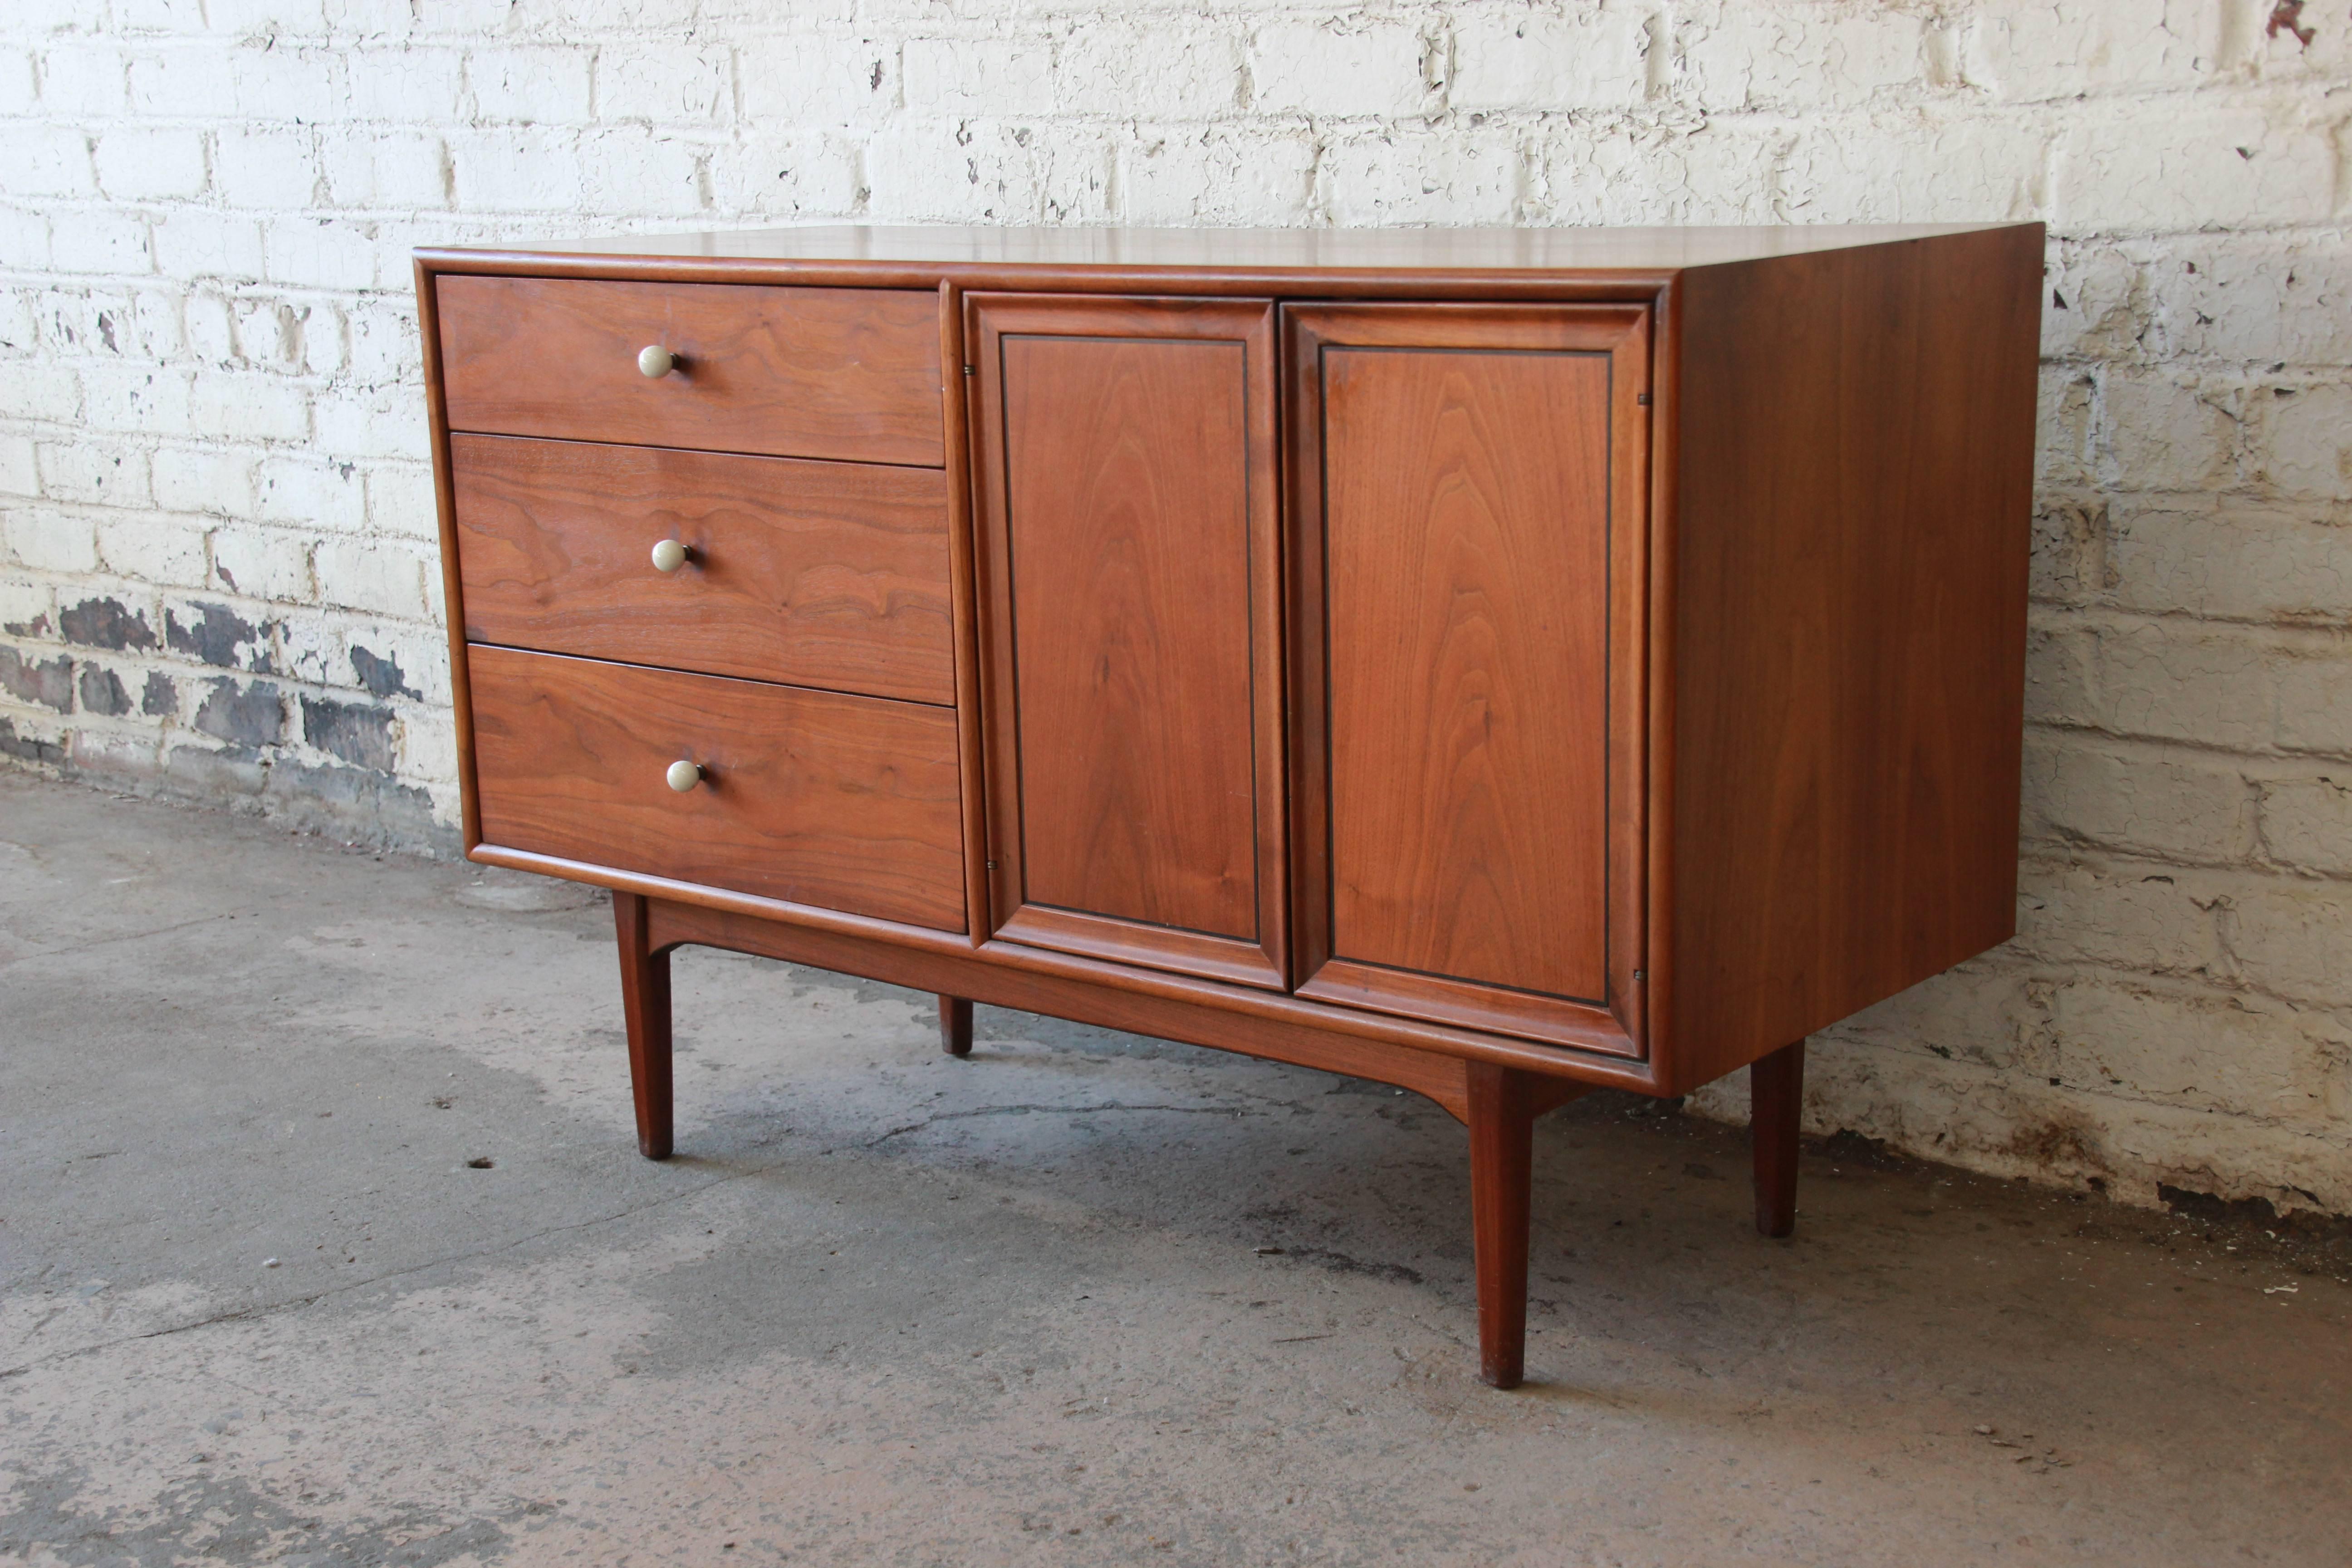 A very nice Mid-Century Modern walnut small sideboard or credenza designed by Kipp Stewart for Drexel's 